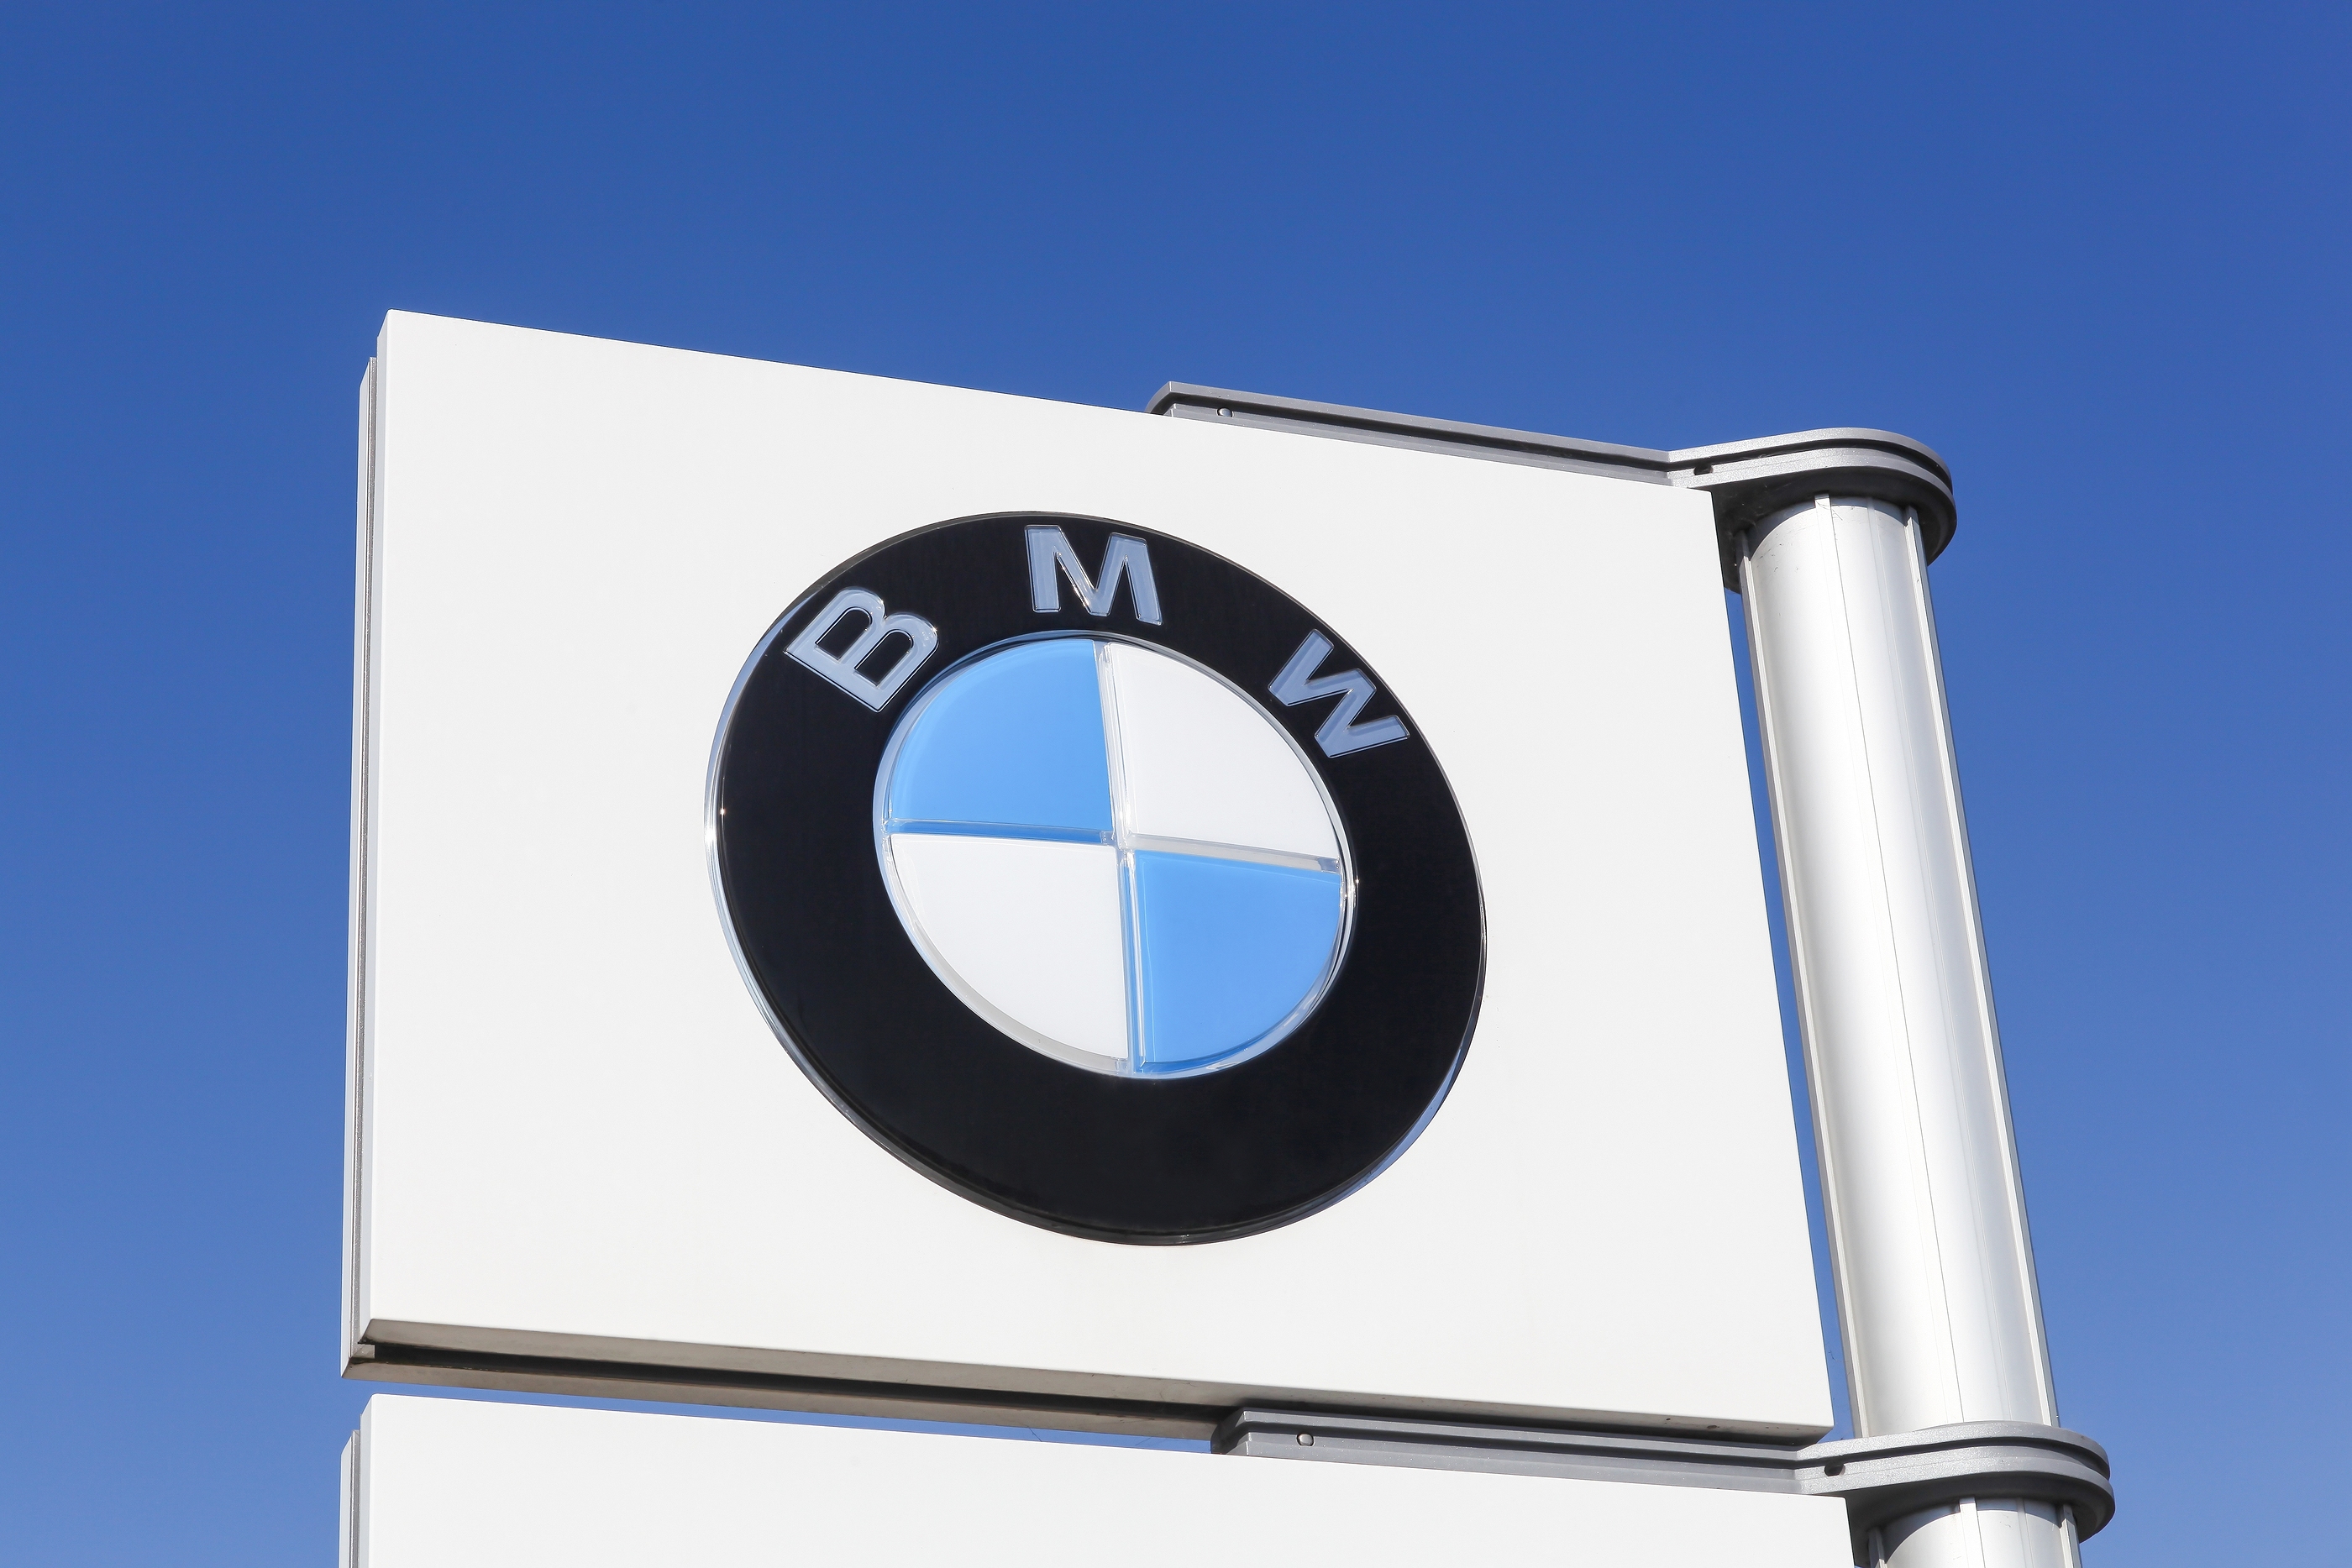 Where Can I Sell My BMW Fast? - Cash Cars Buyer